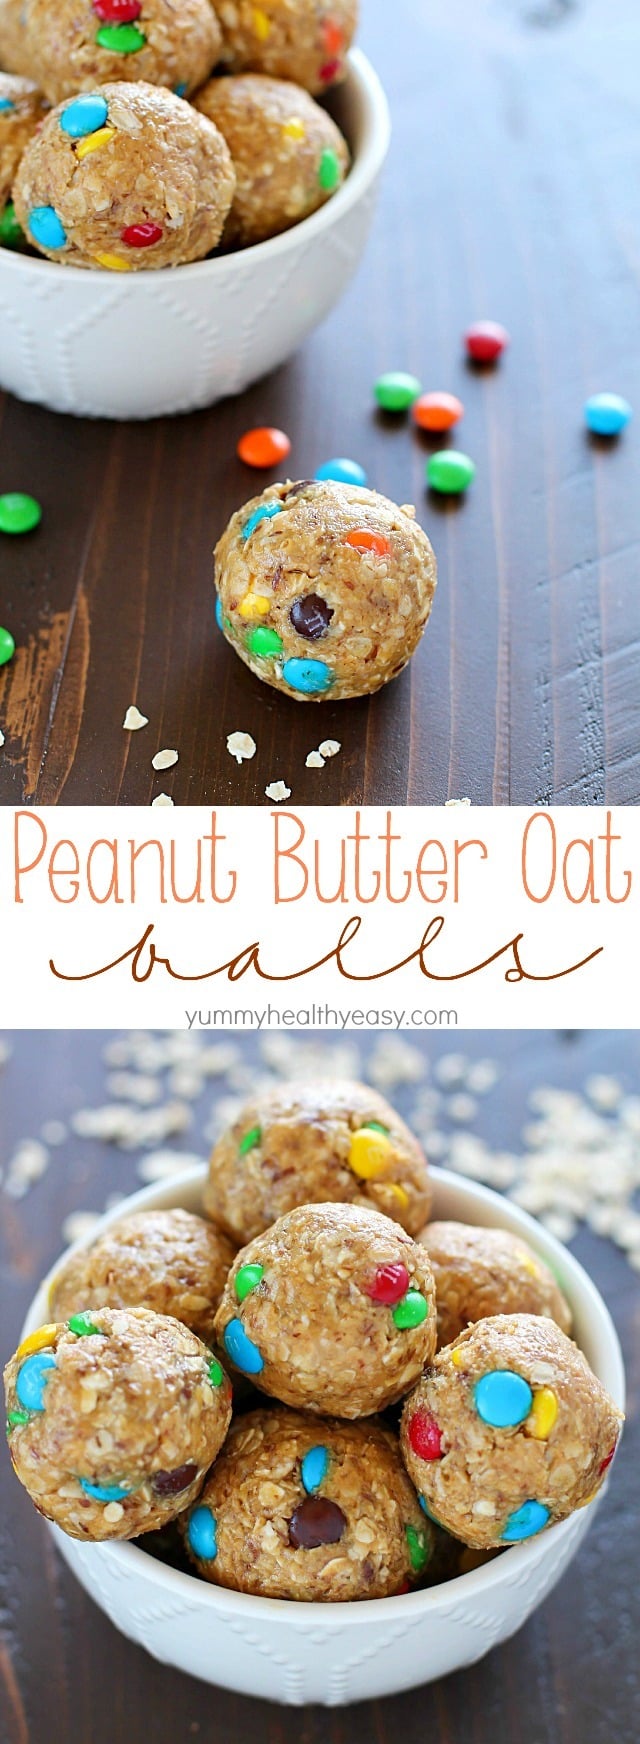 Unbelievably delicious Peanut Butter Oat Balls made in minutes, with only a few ingredients. Plus a KitchenAid Mixer with Ice Cream Maker Giveaway!